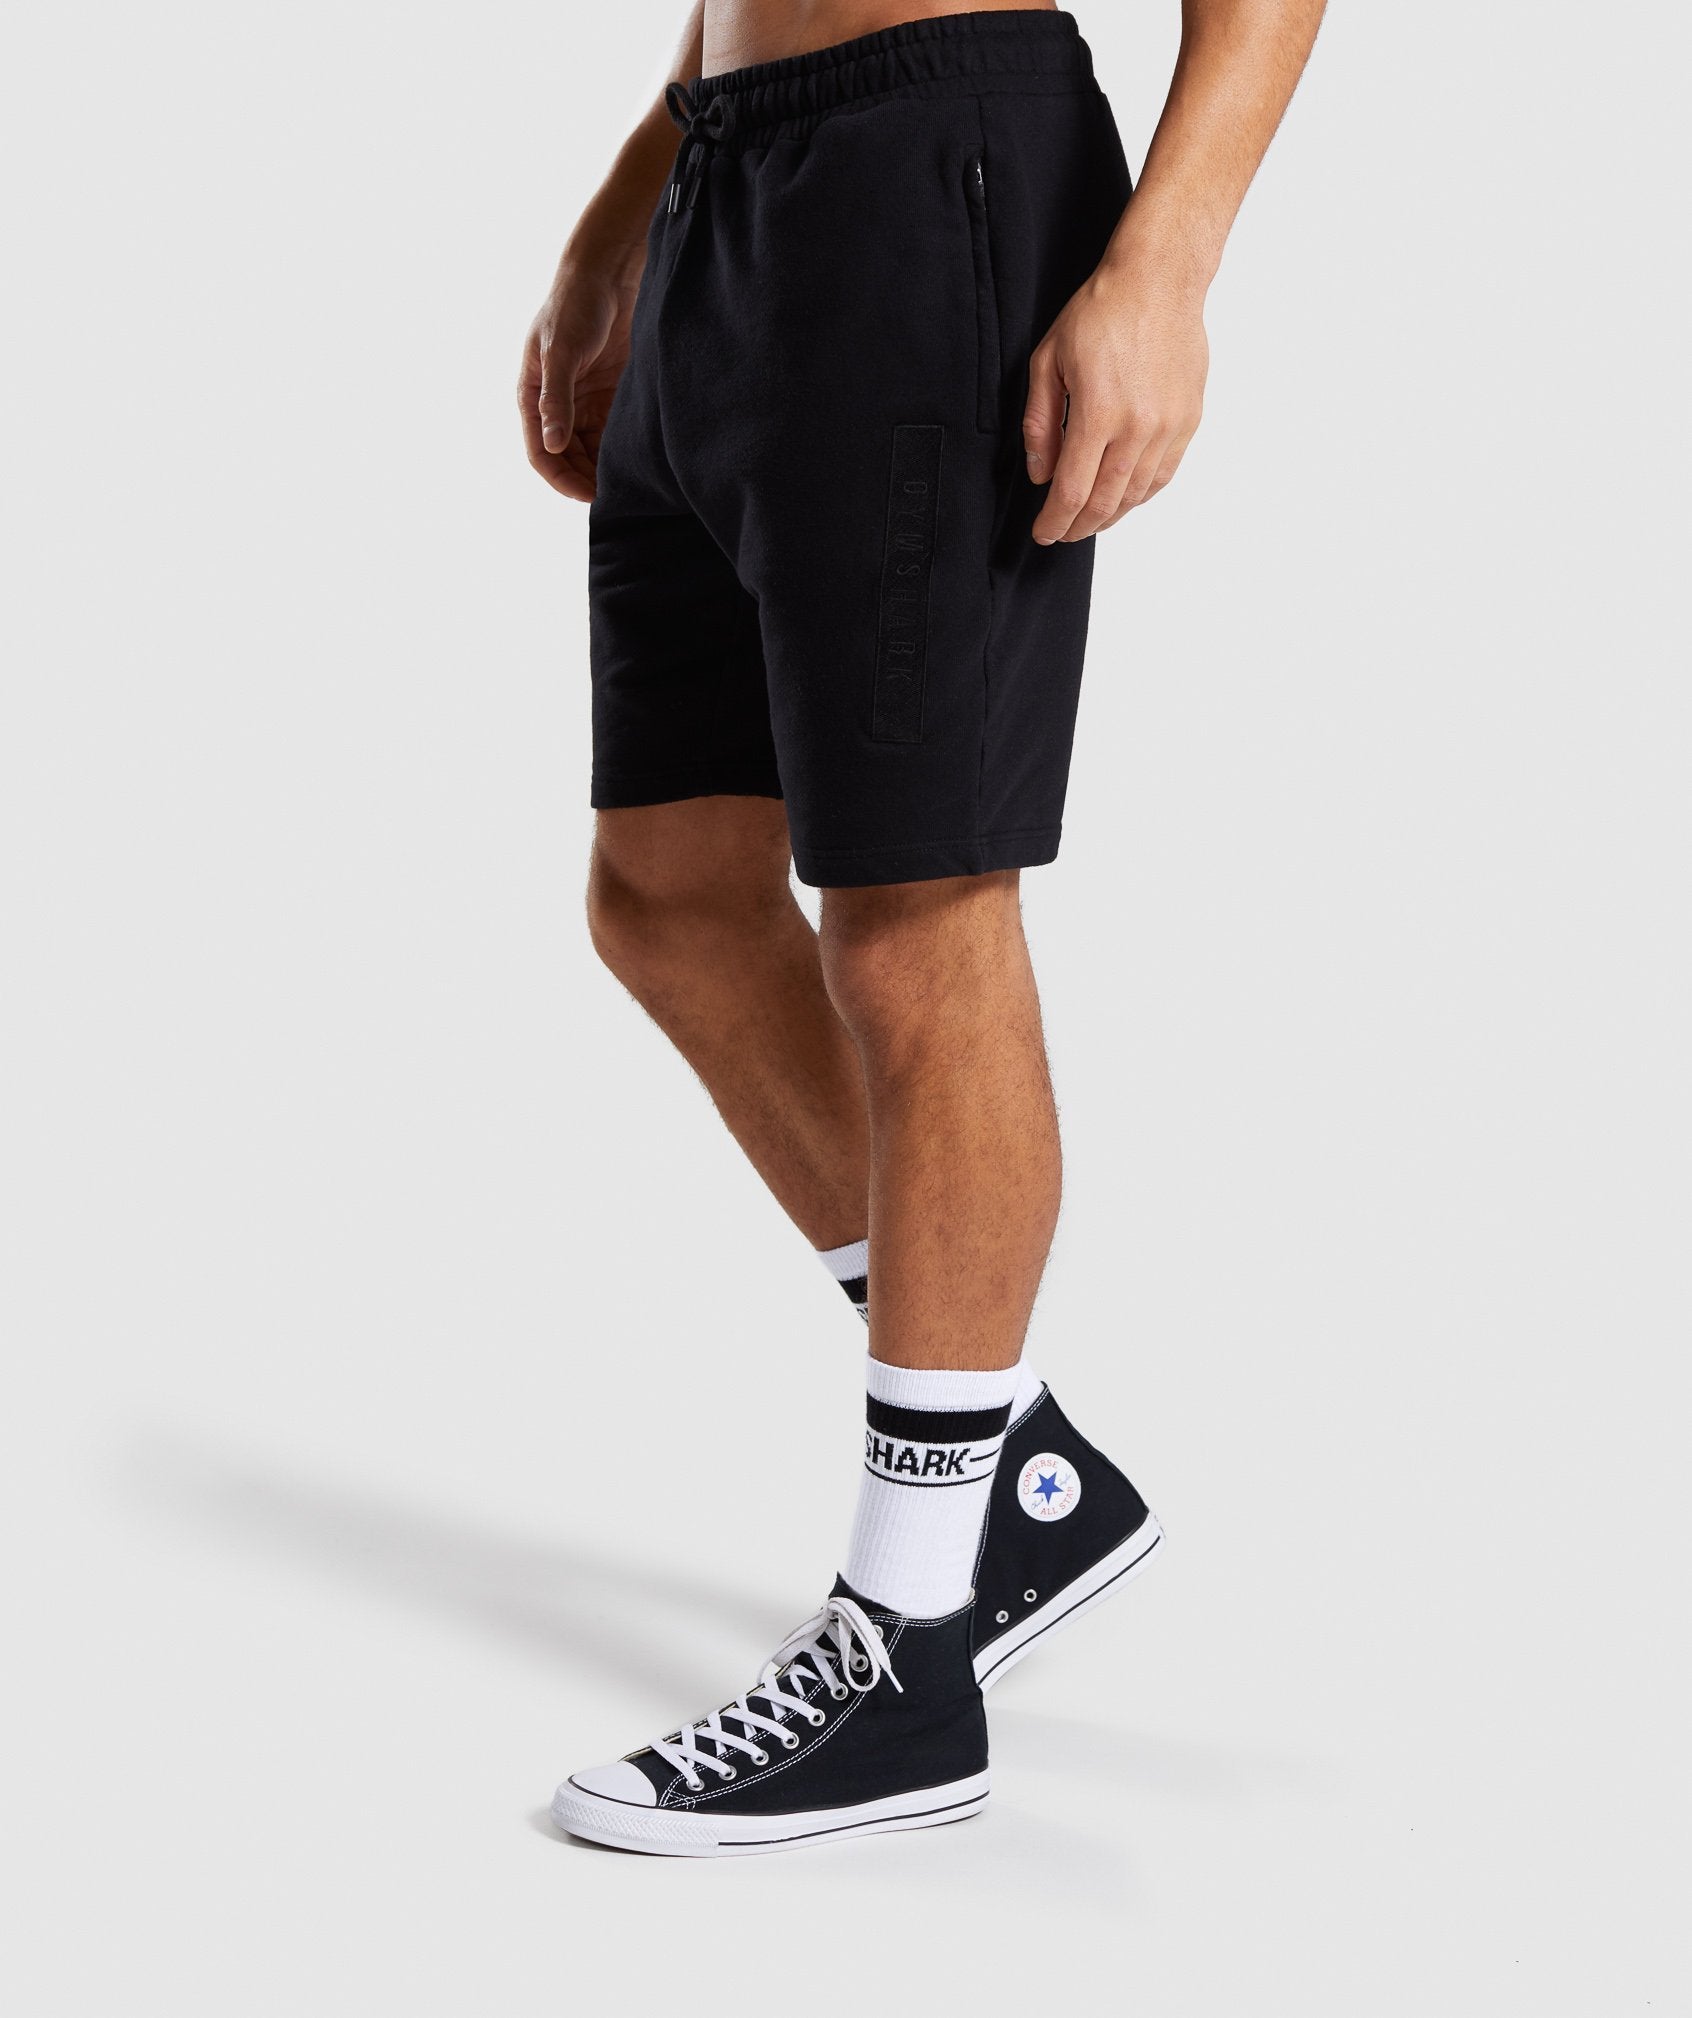 Crucial Shorts in Black - view 3